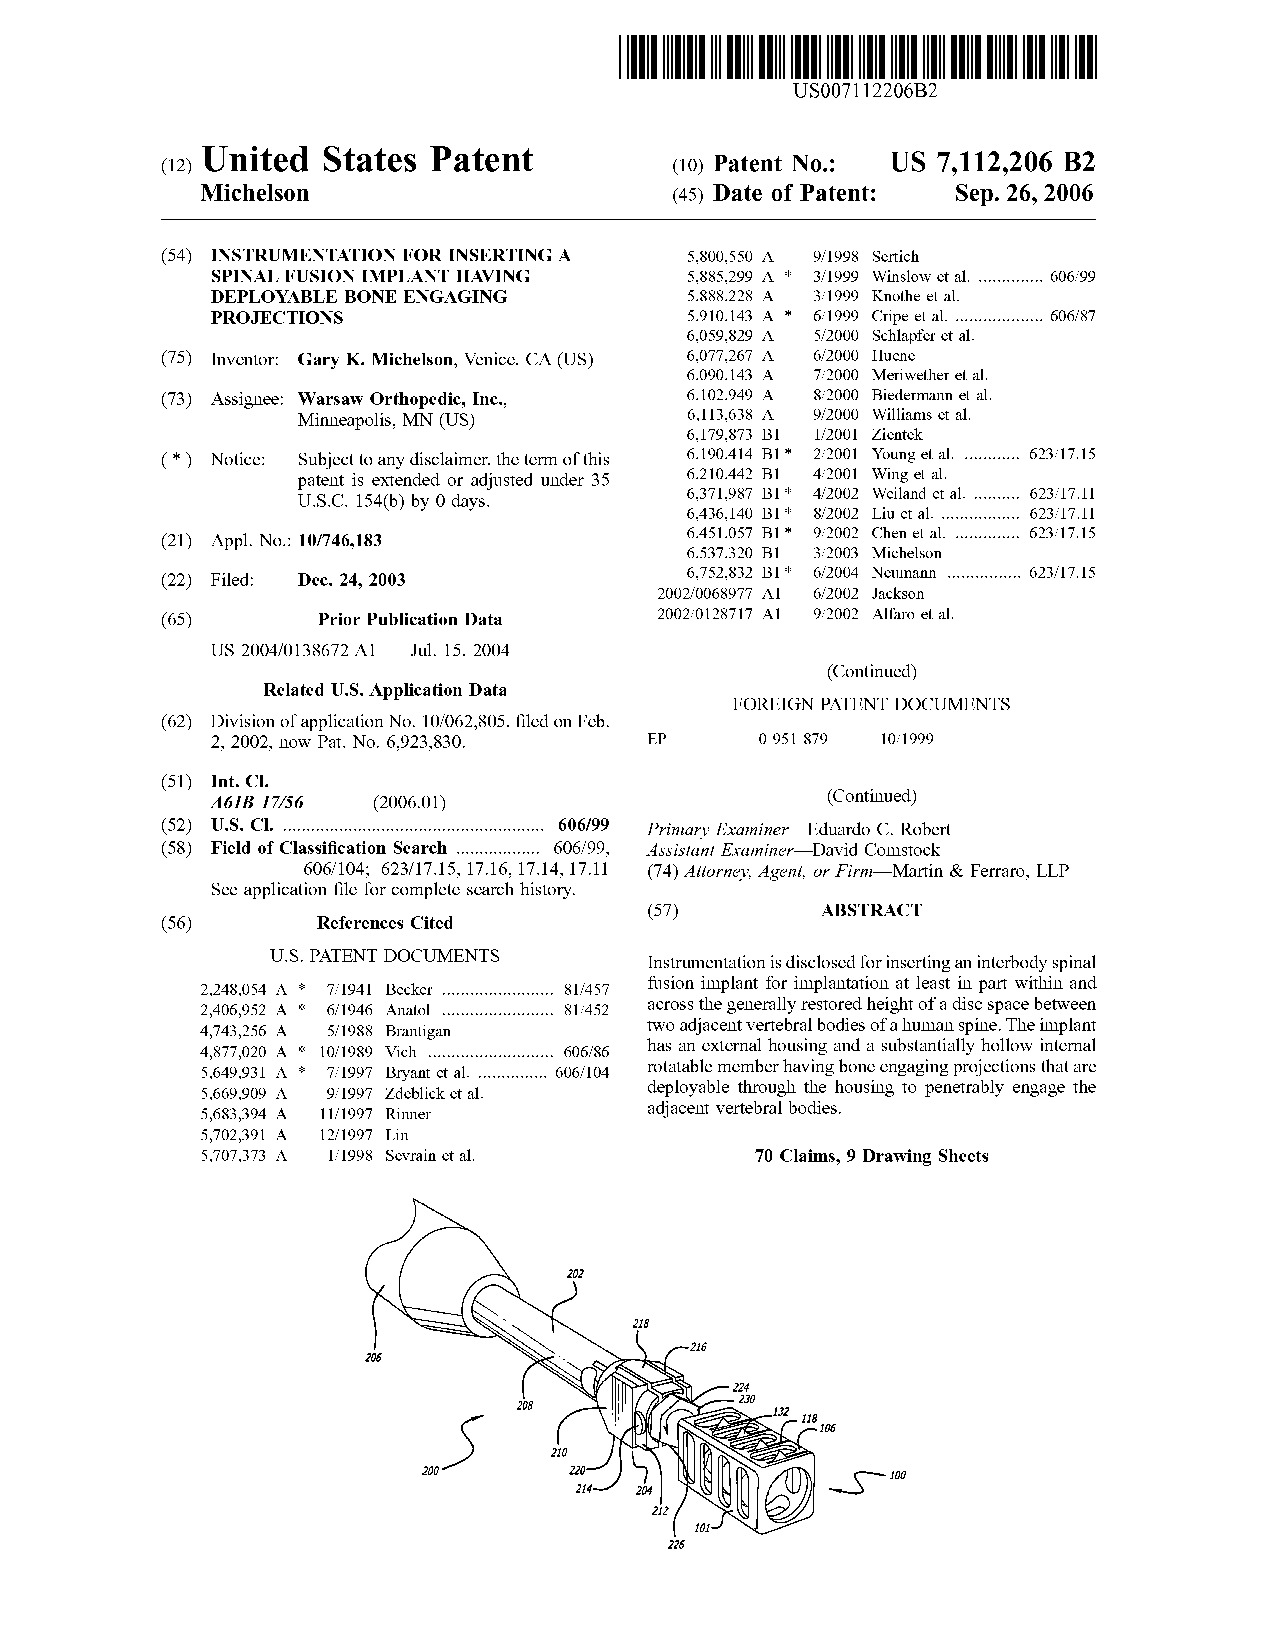 Instrumentation for inserting a spinal fusion implant having deployable     bone engaging projections - Patent 7,112,206